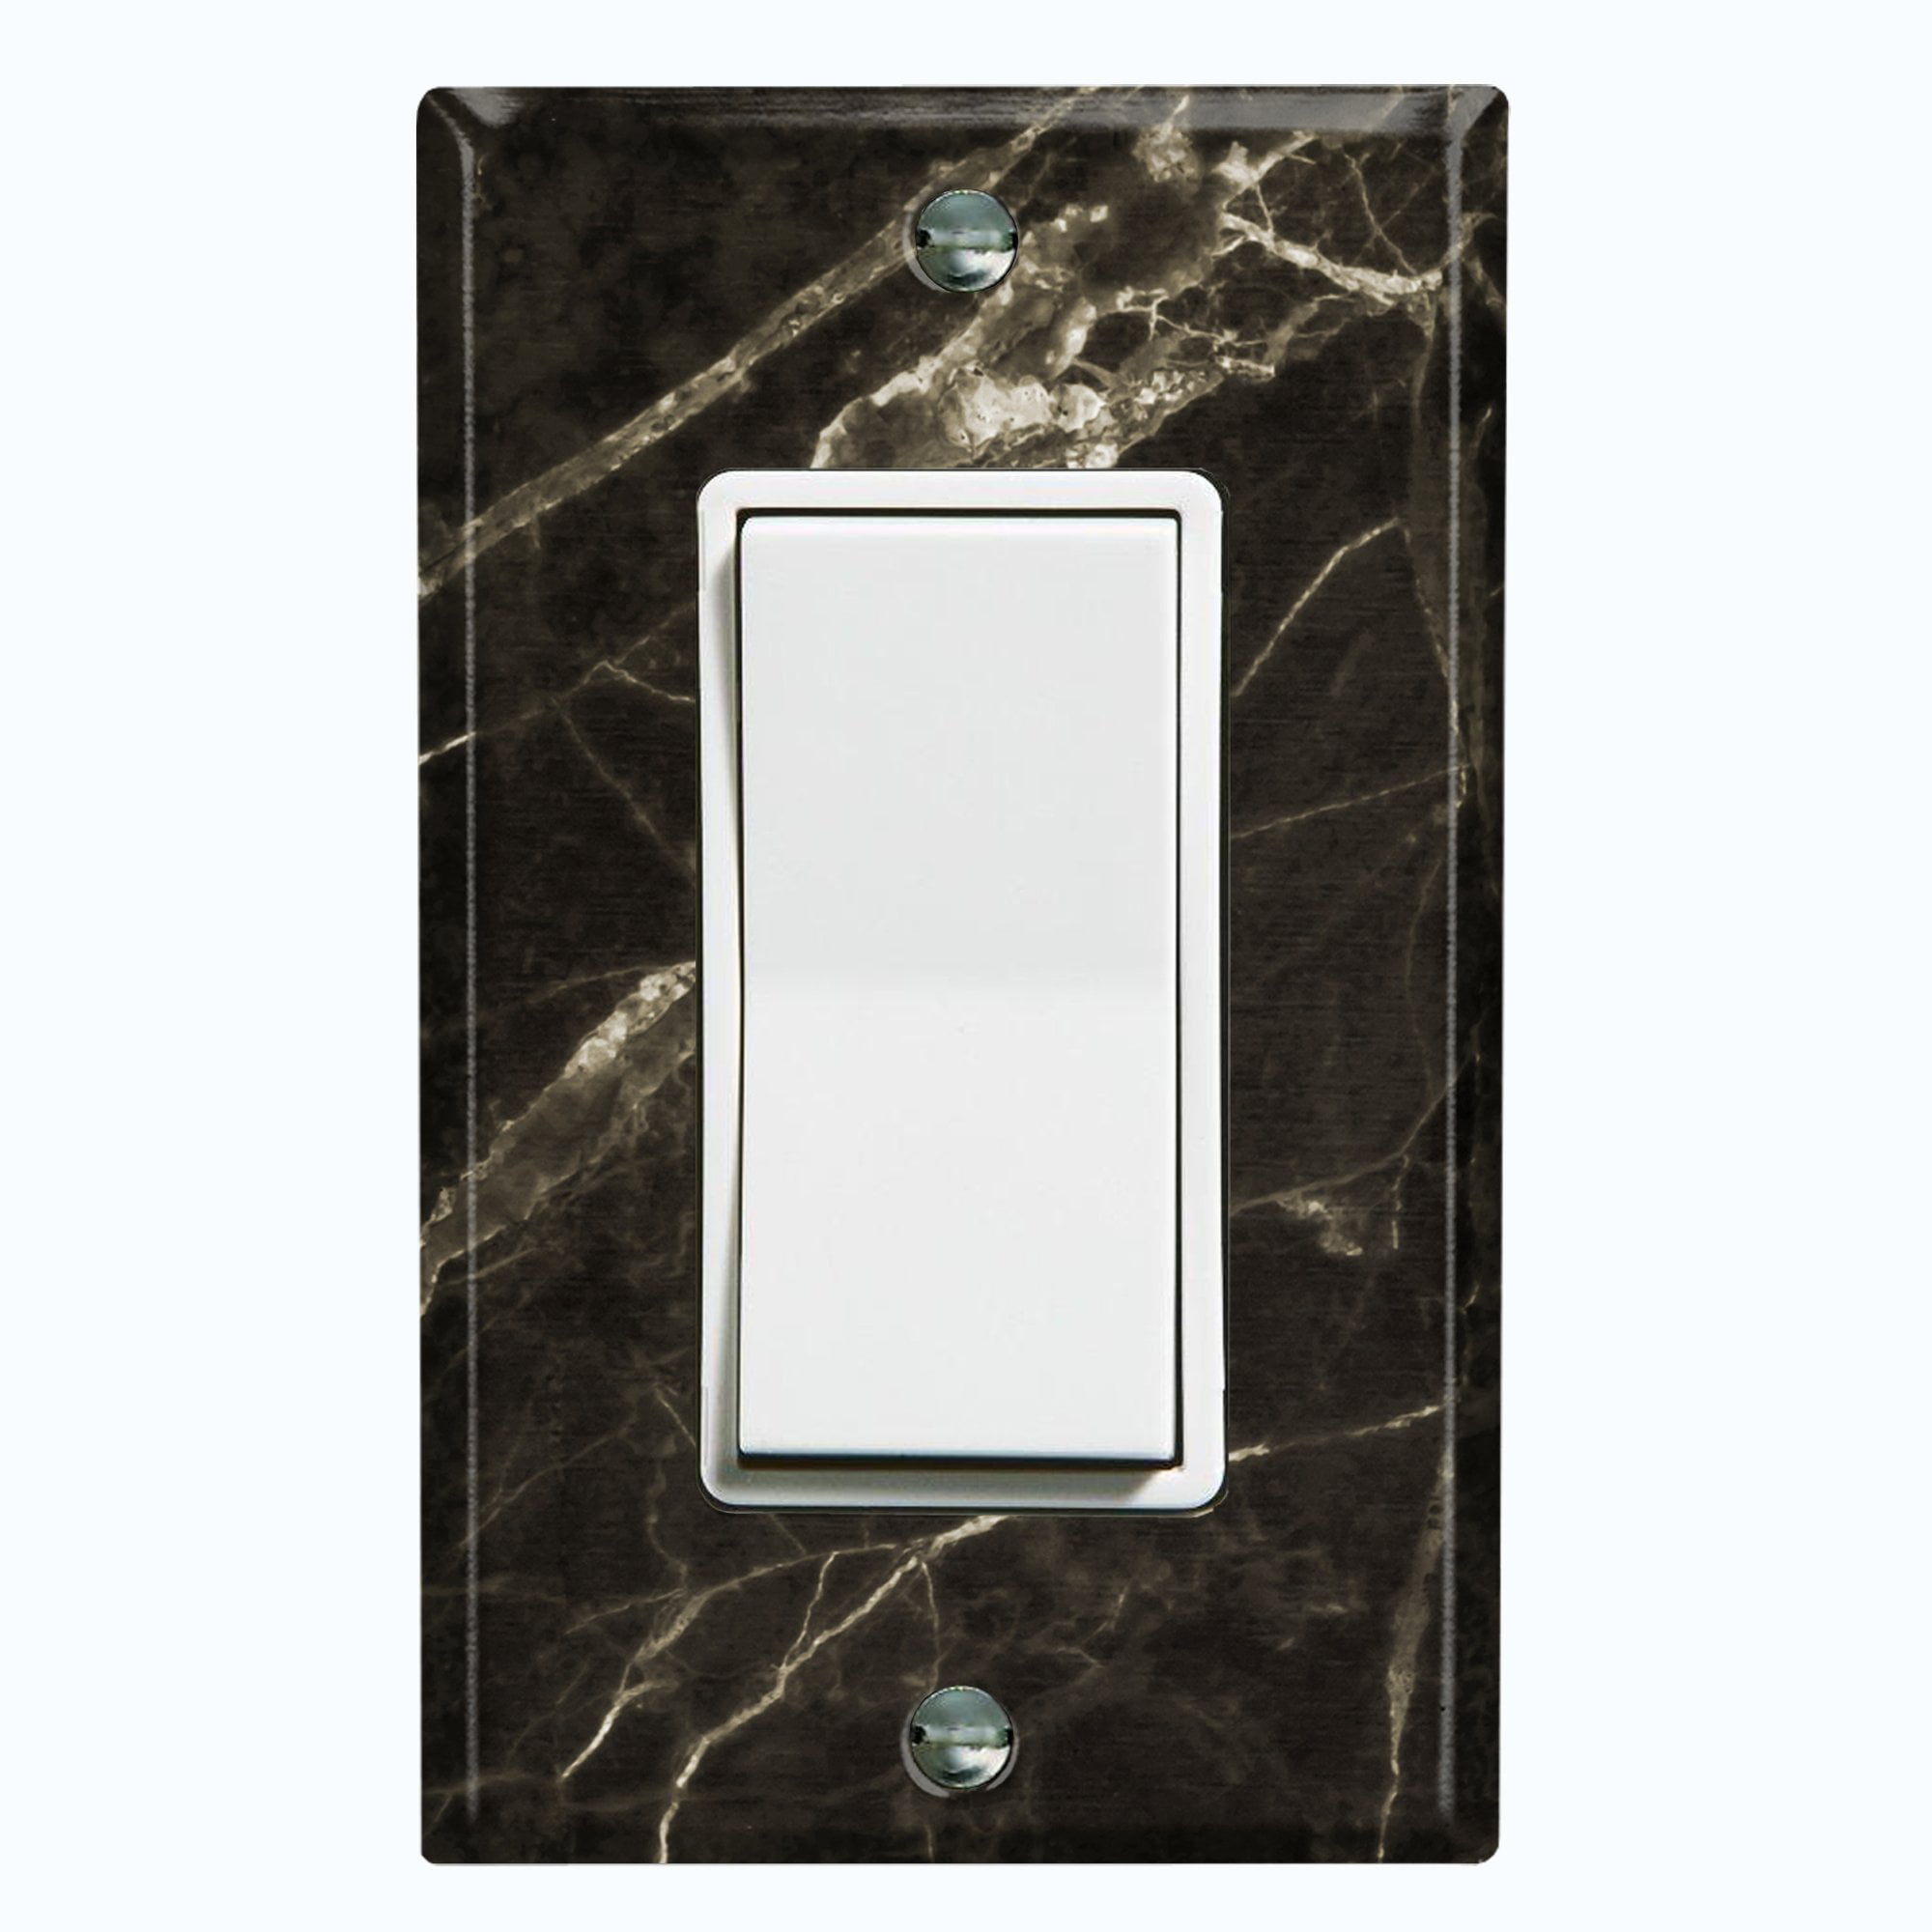 RED BURGUNDY BLACK MARBLE TILE IMAGE HOME DECOR LIGHT SWITCH PLATES AND OUTLETS 